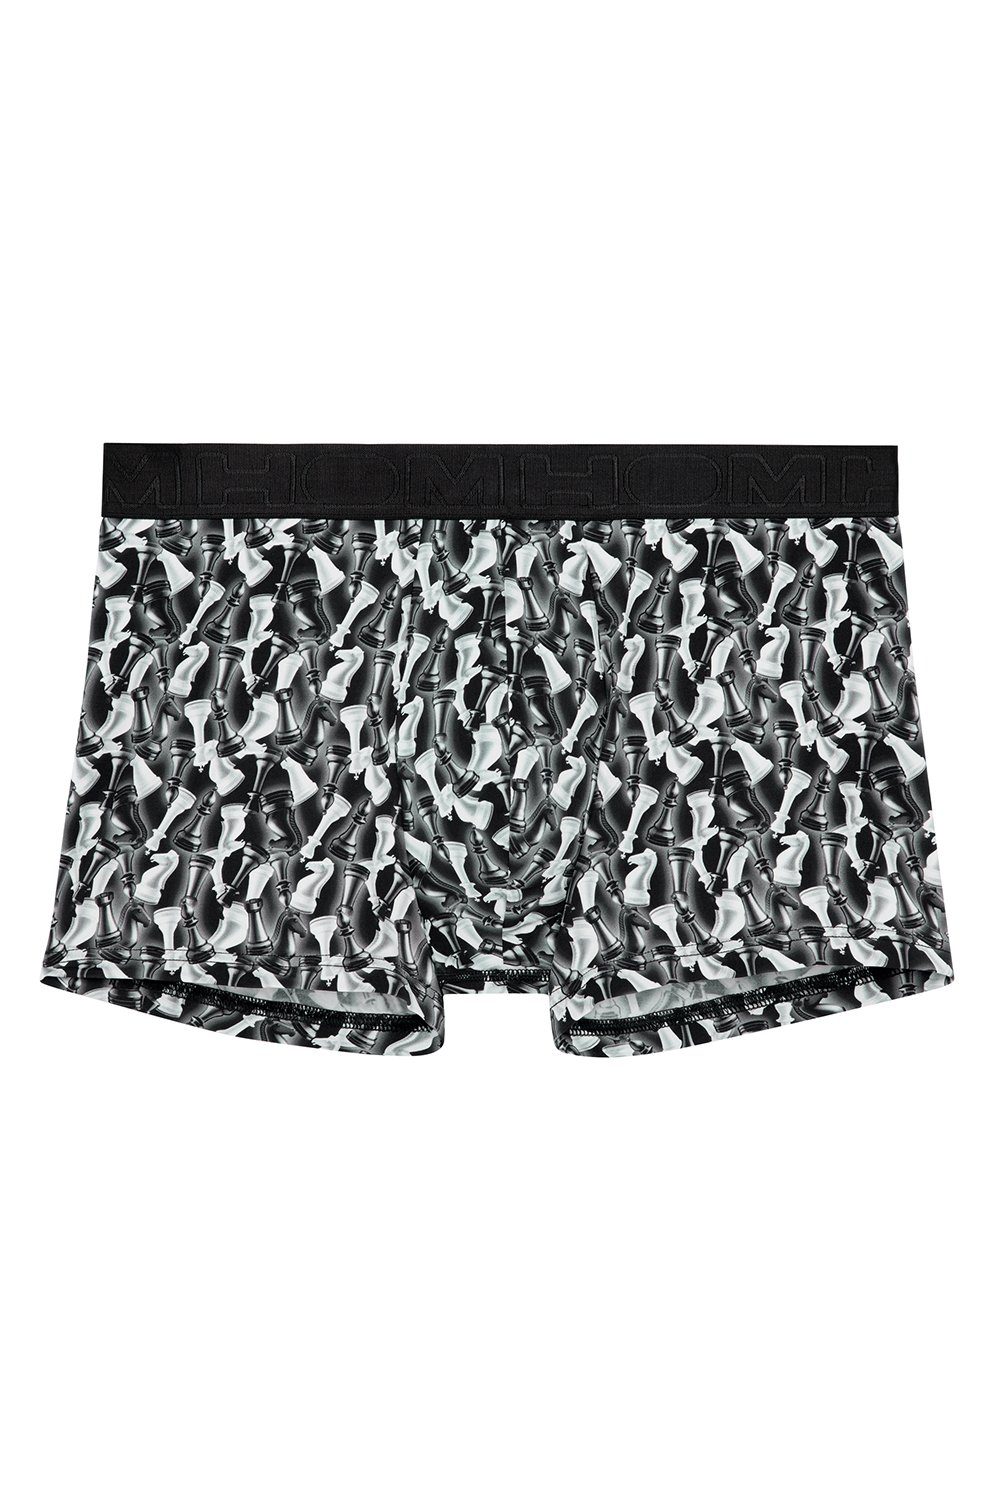 Briefs Chess Hom Hipster 402671 Boxer